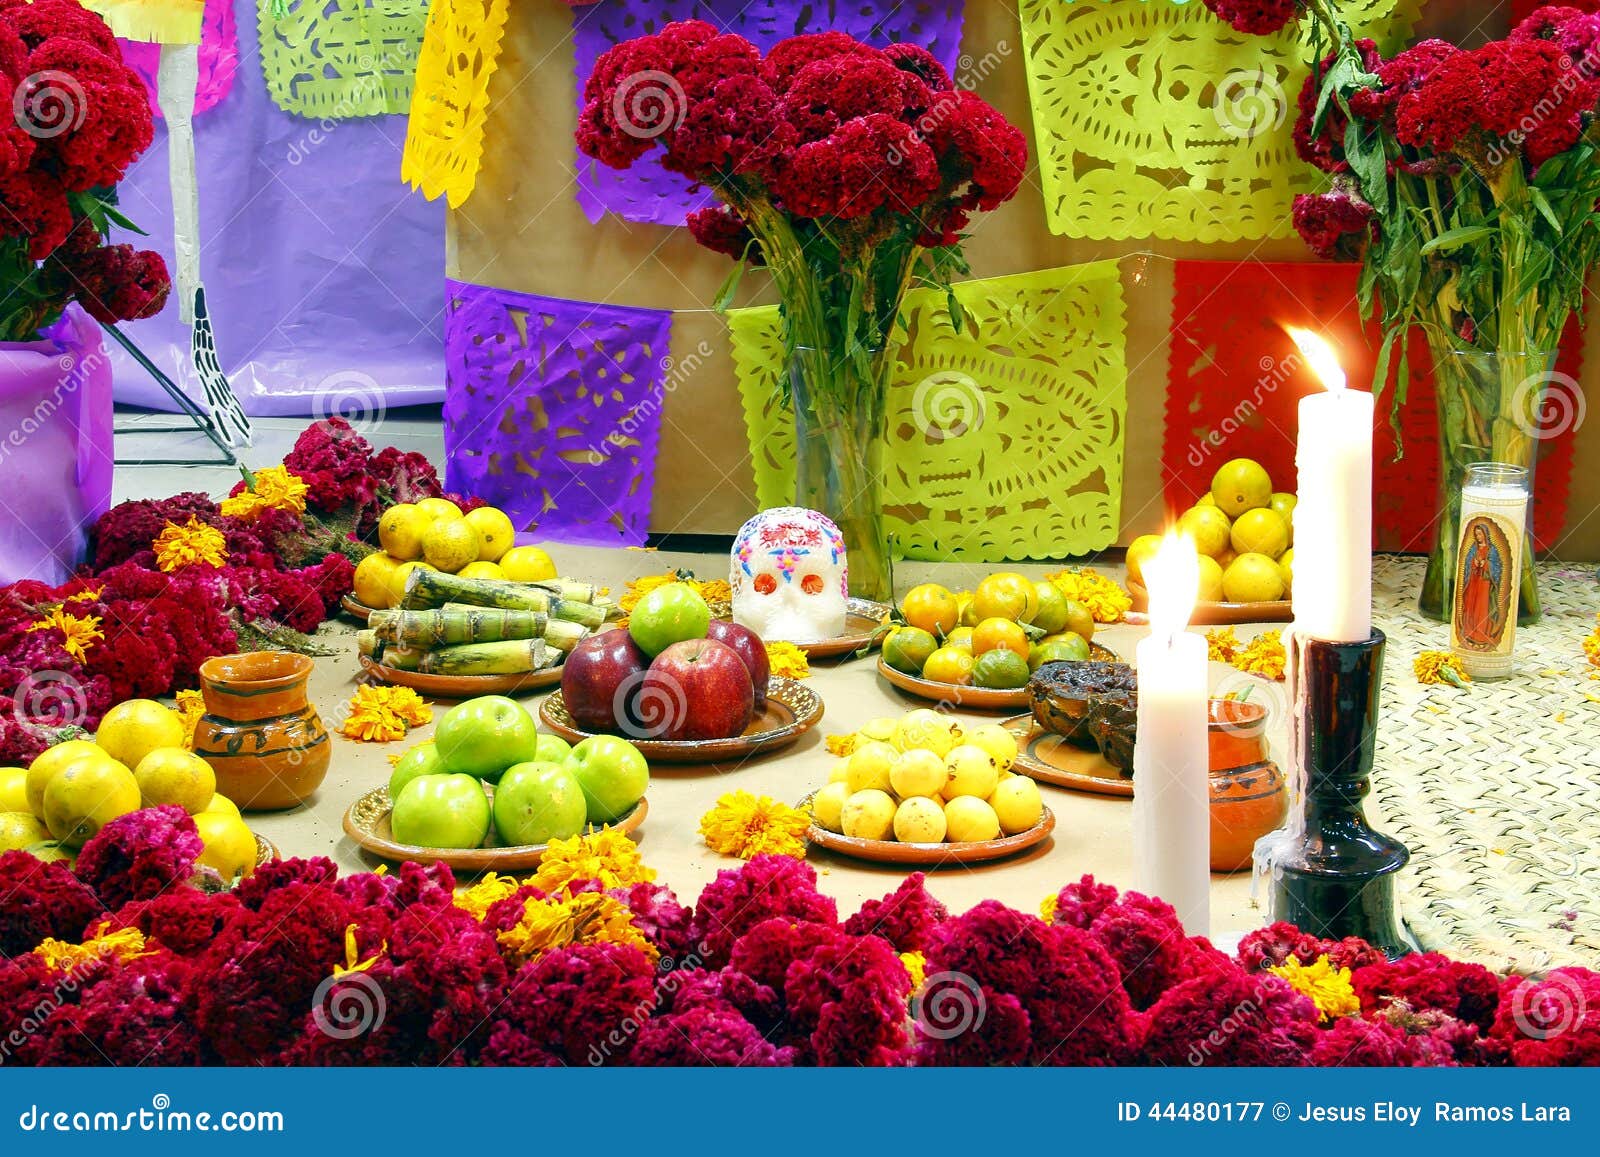 day of the dead celebration in mixquic, mexico city v